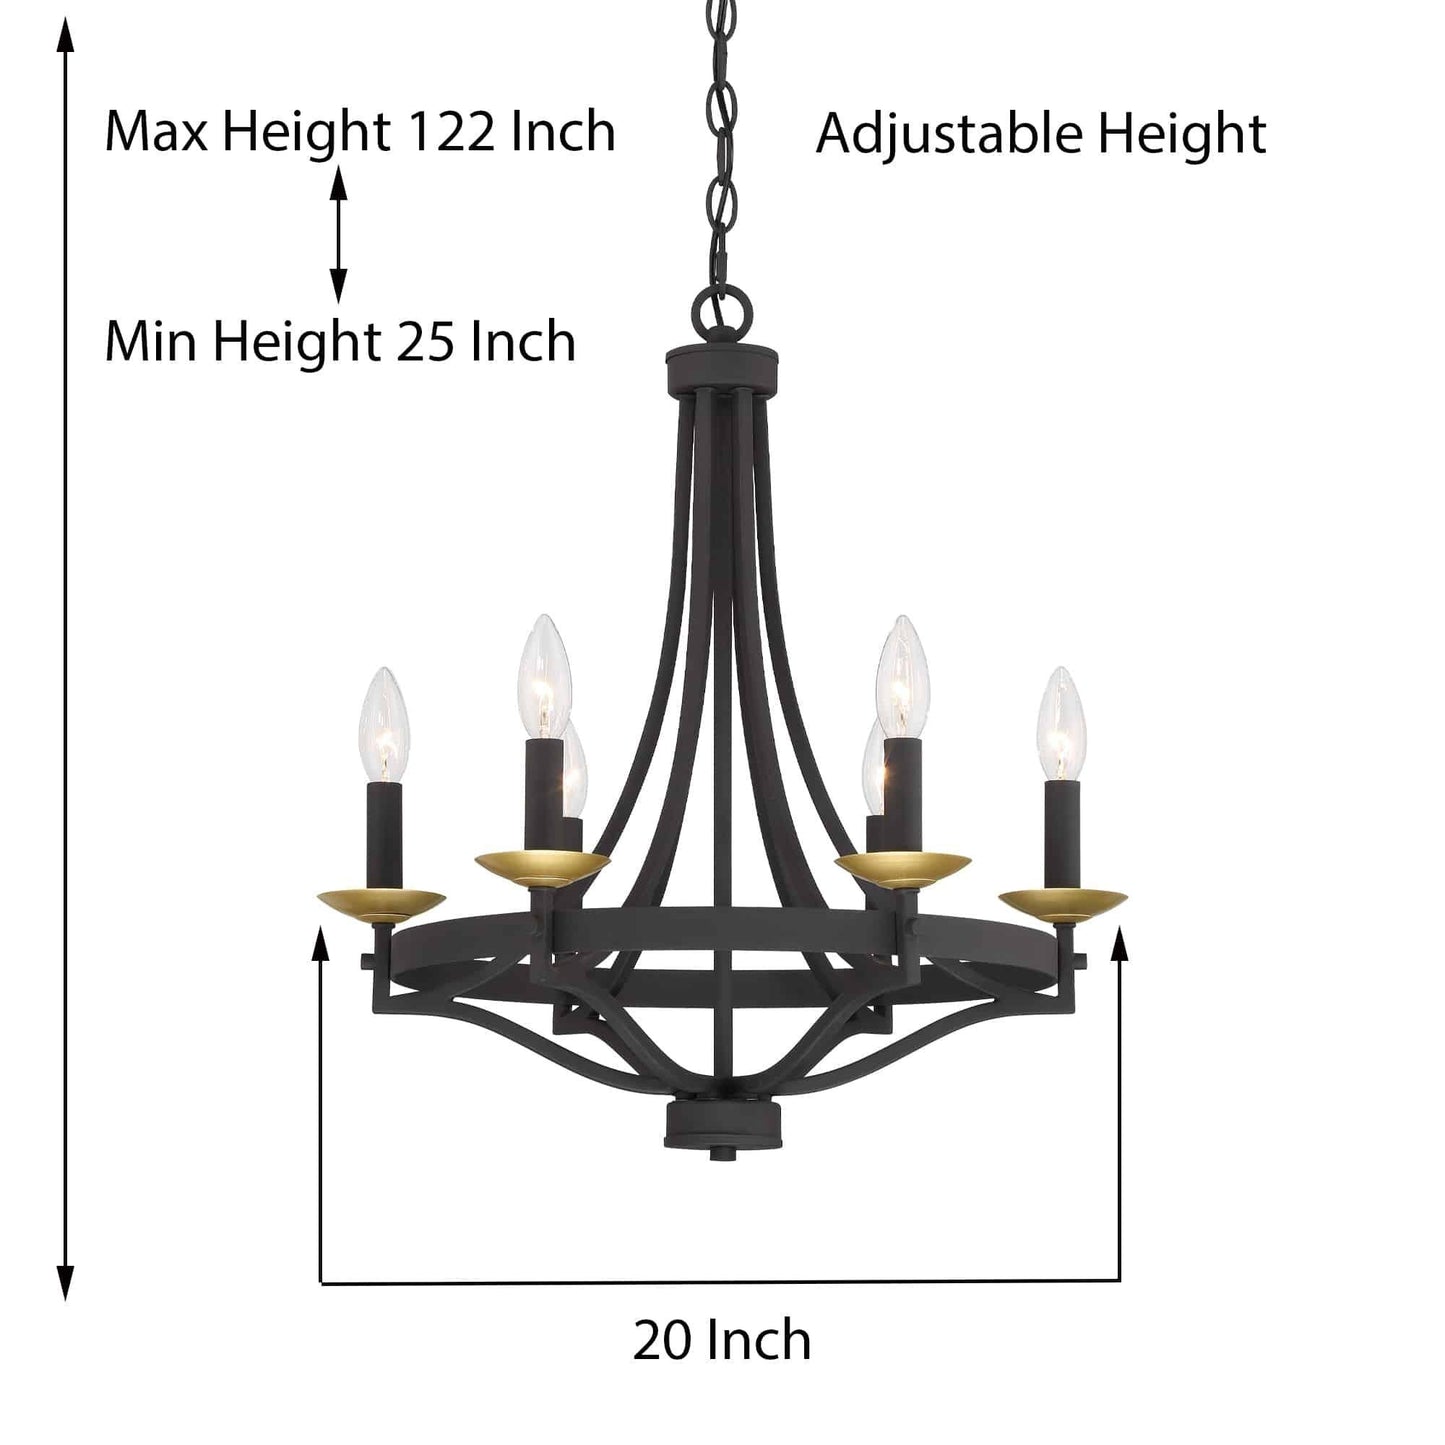 6 light candle style empire entryway chandelier (9) by ACROMA